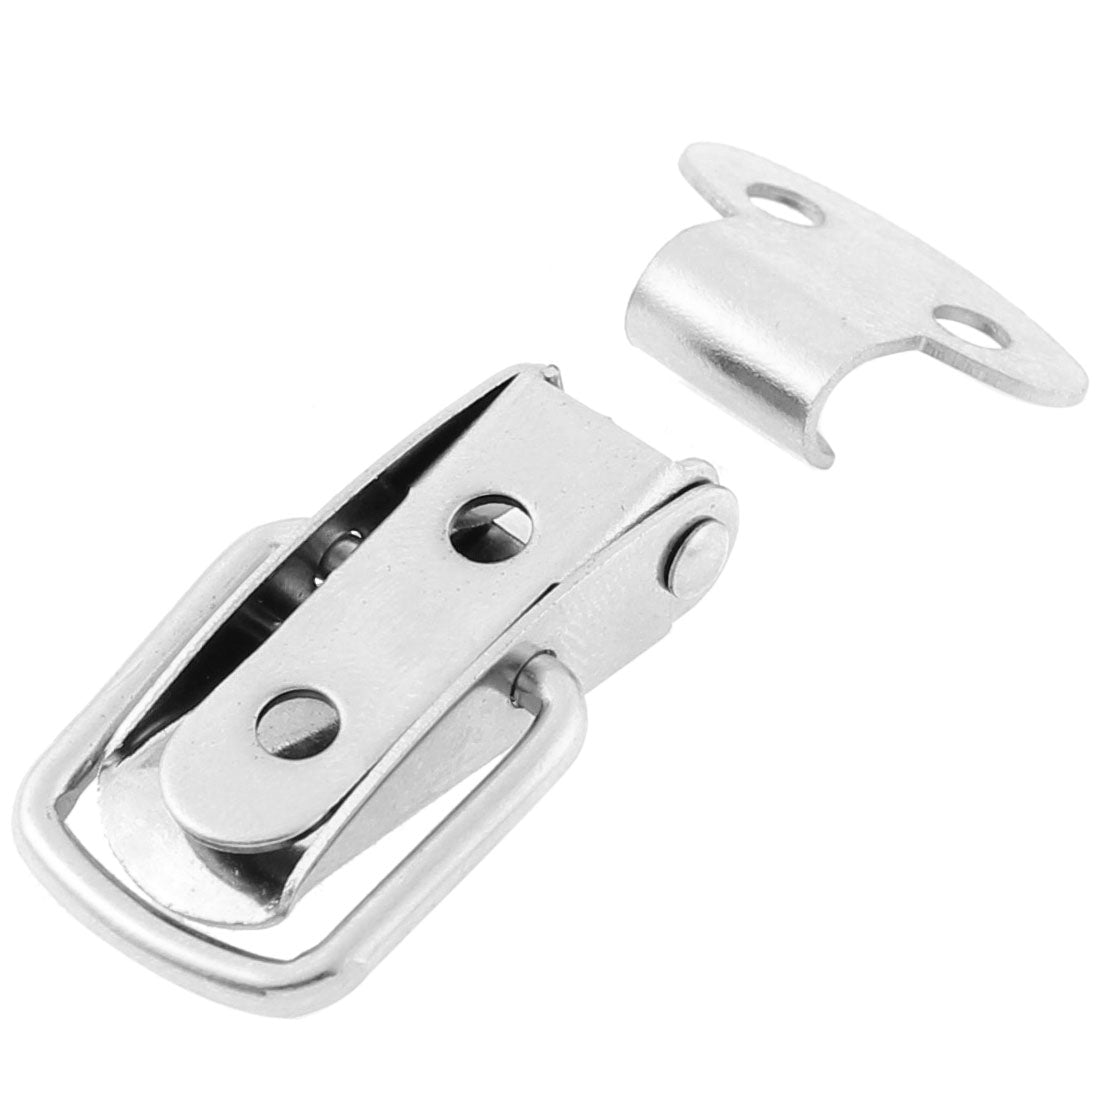 uxcell Uxcell Suitcase Boxes Spring Loaded Toggle Latch Clasp 5Pcs